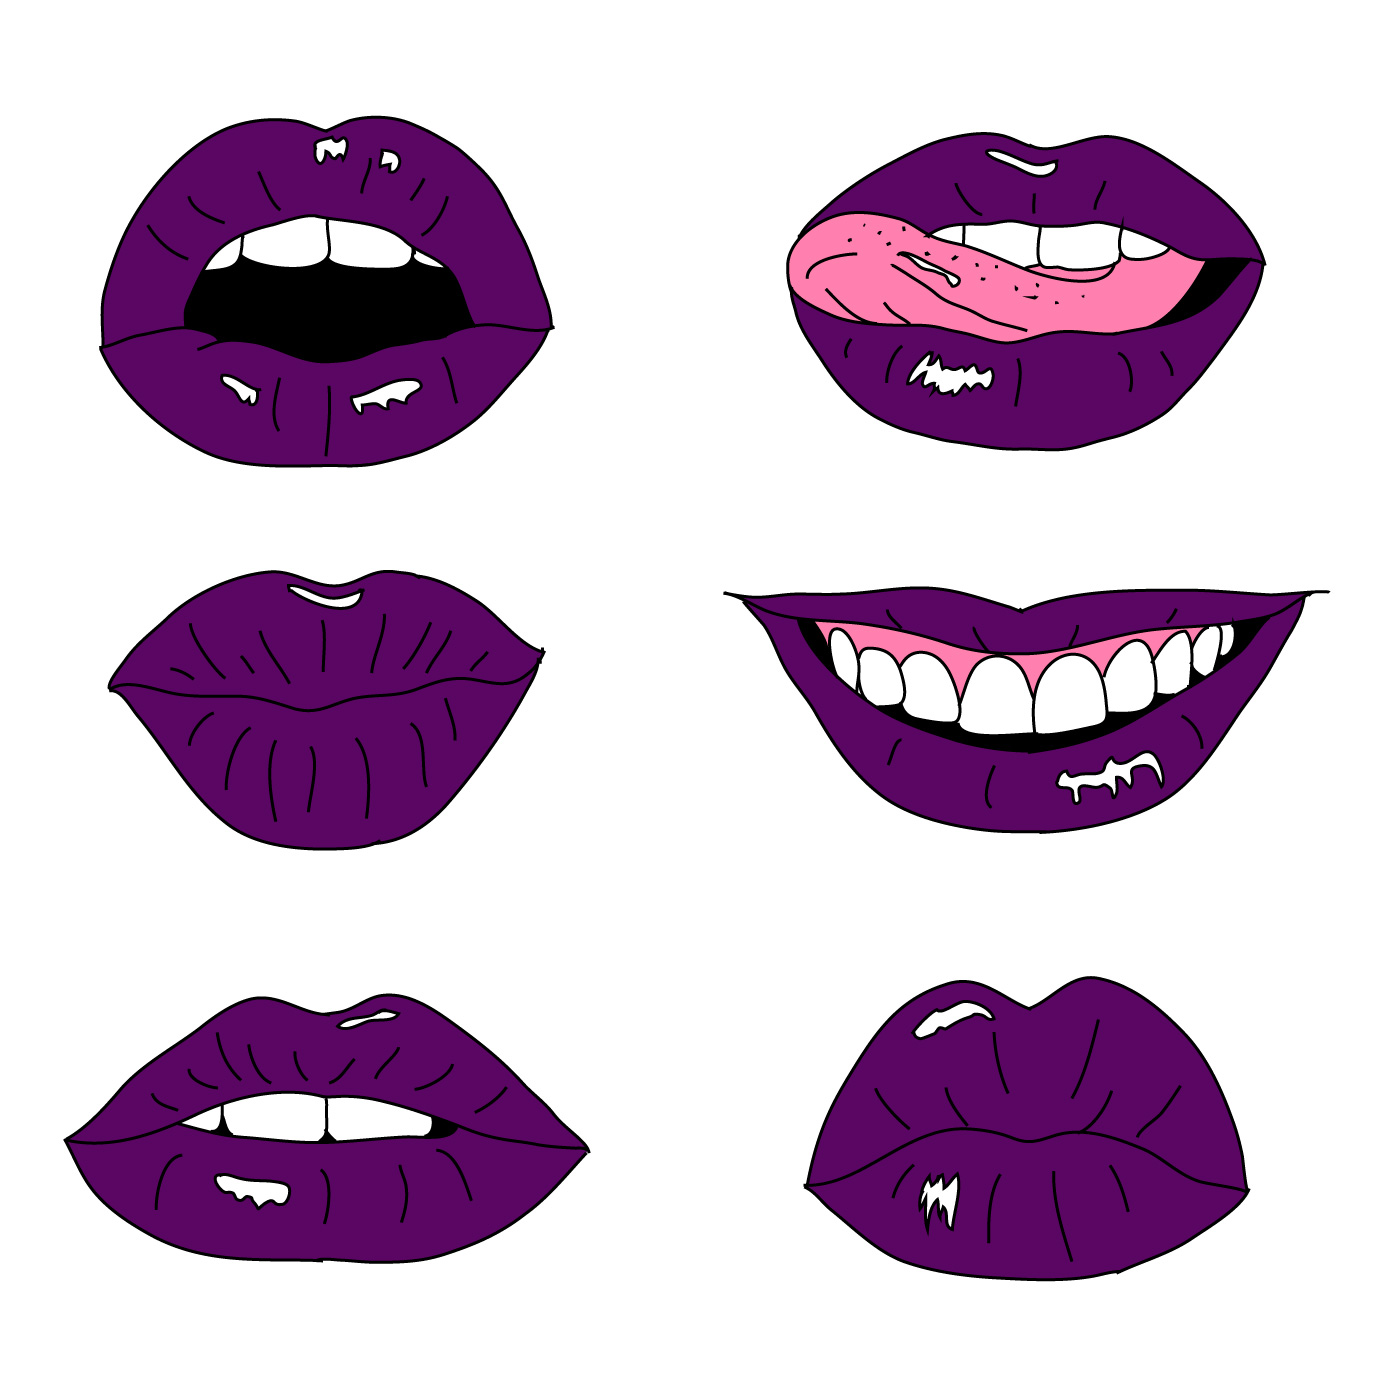 Hand drawn Lips Collection 214987 - Download Free Vectors, Clipart Graphics & Vector Art